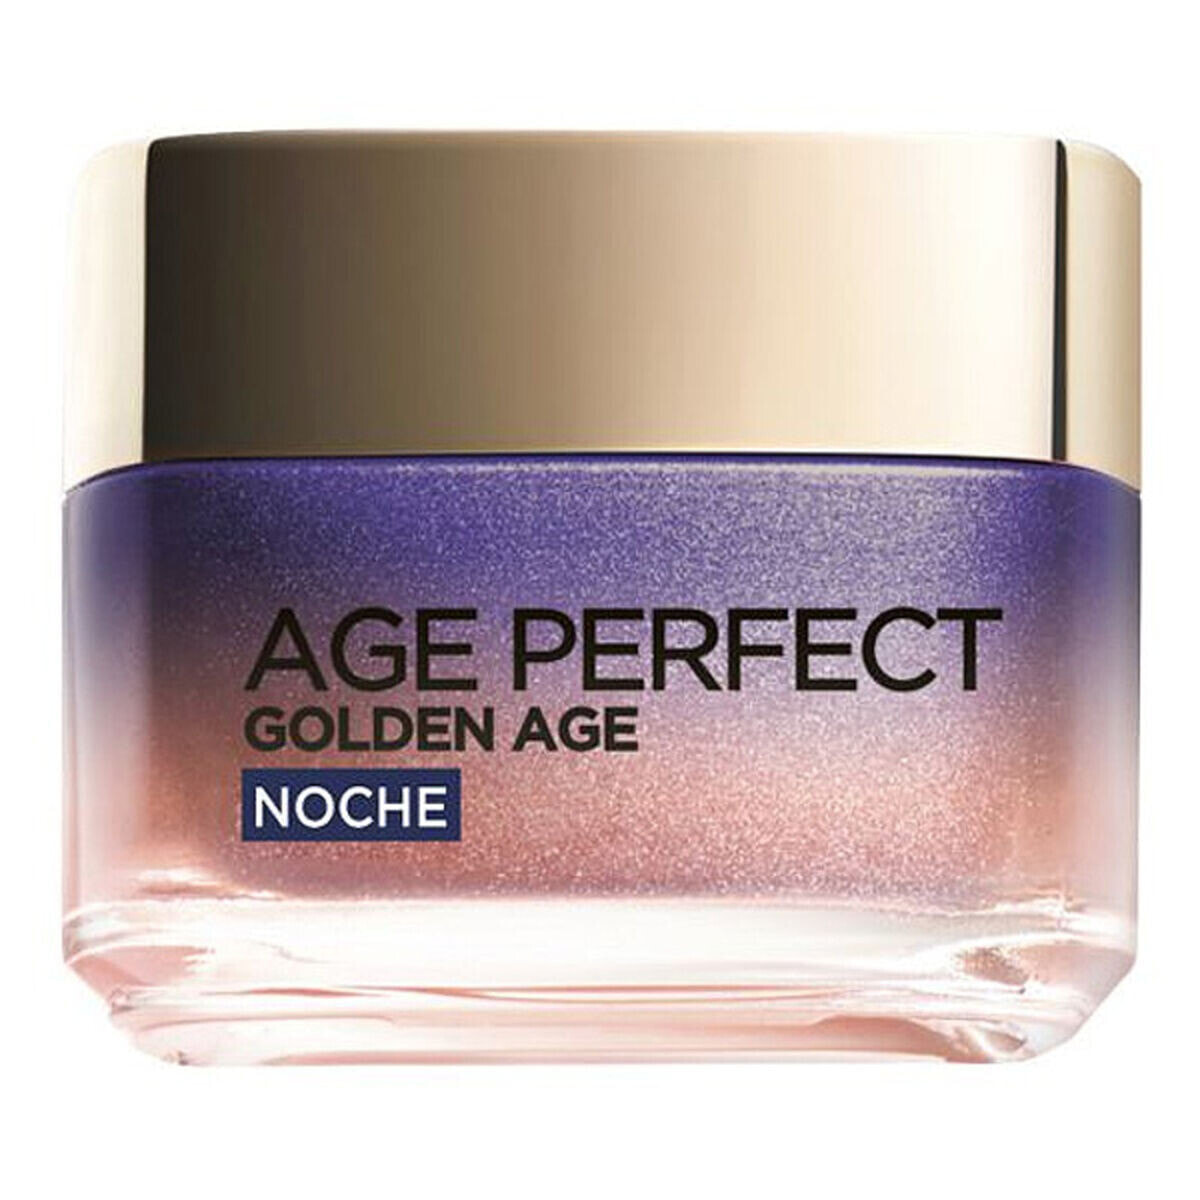 Firming Facial Treatment Golden Age L'Oreal Make Up (50 ml)